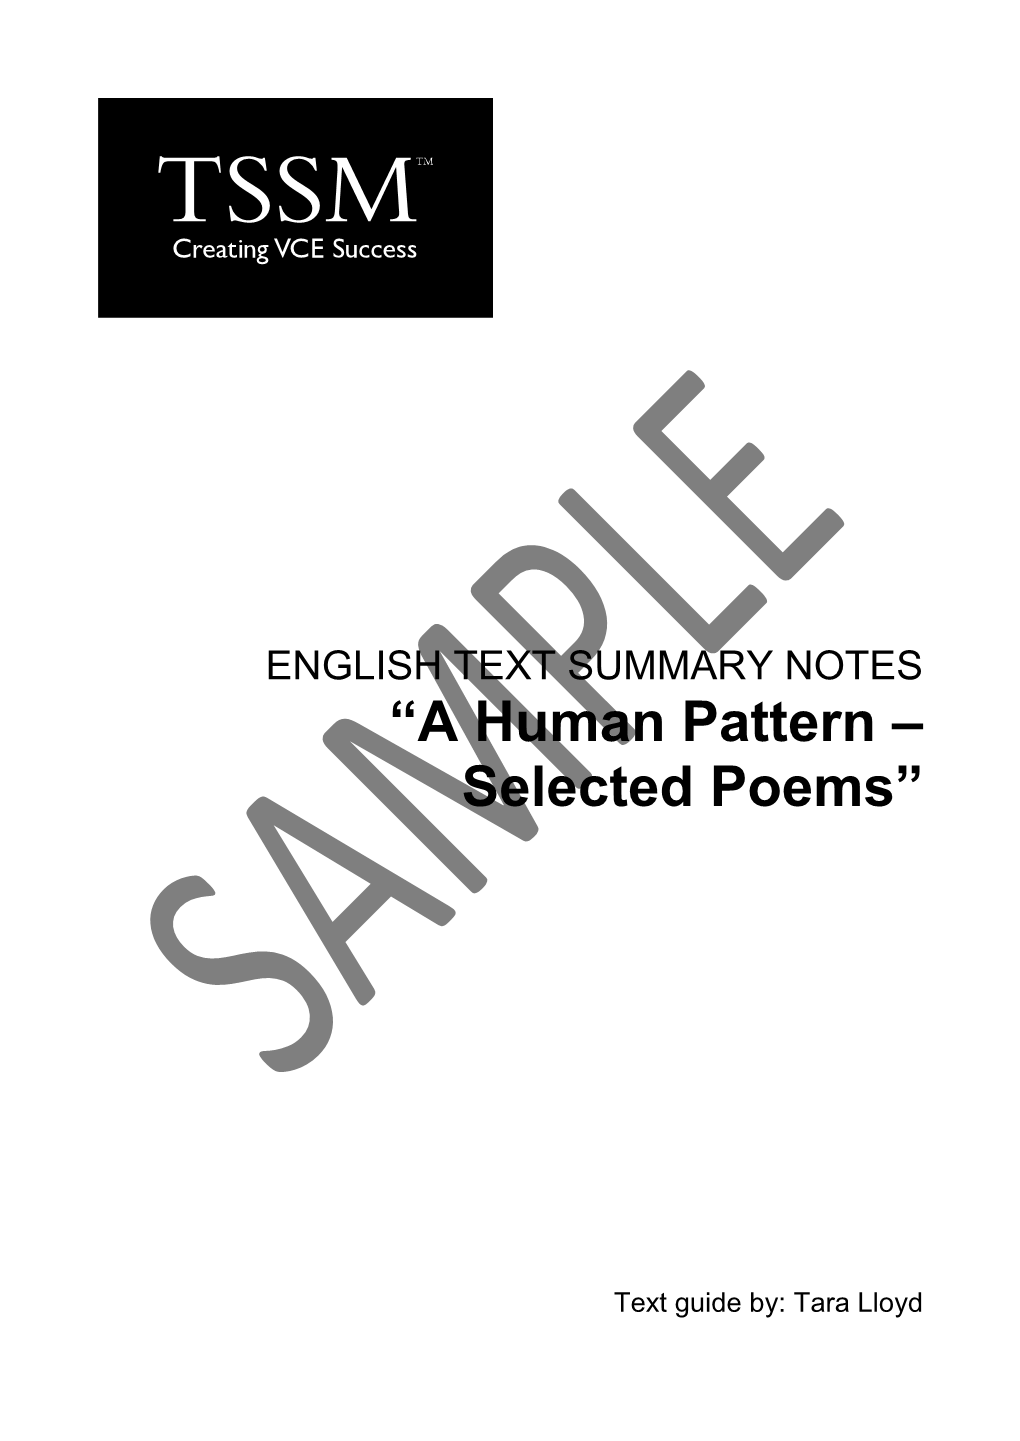 “A Human Pattern – Selected Poems”